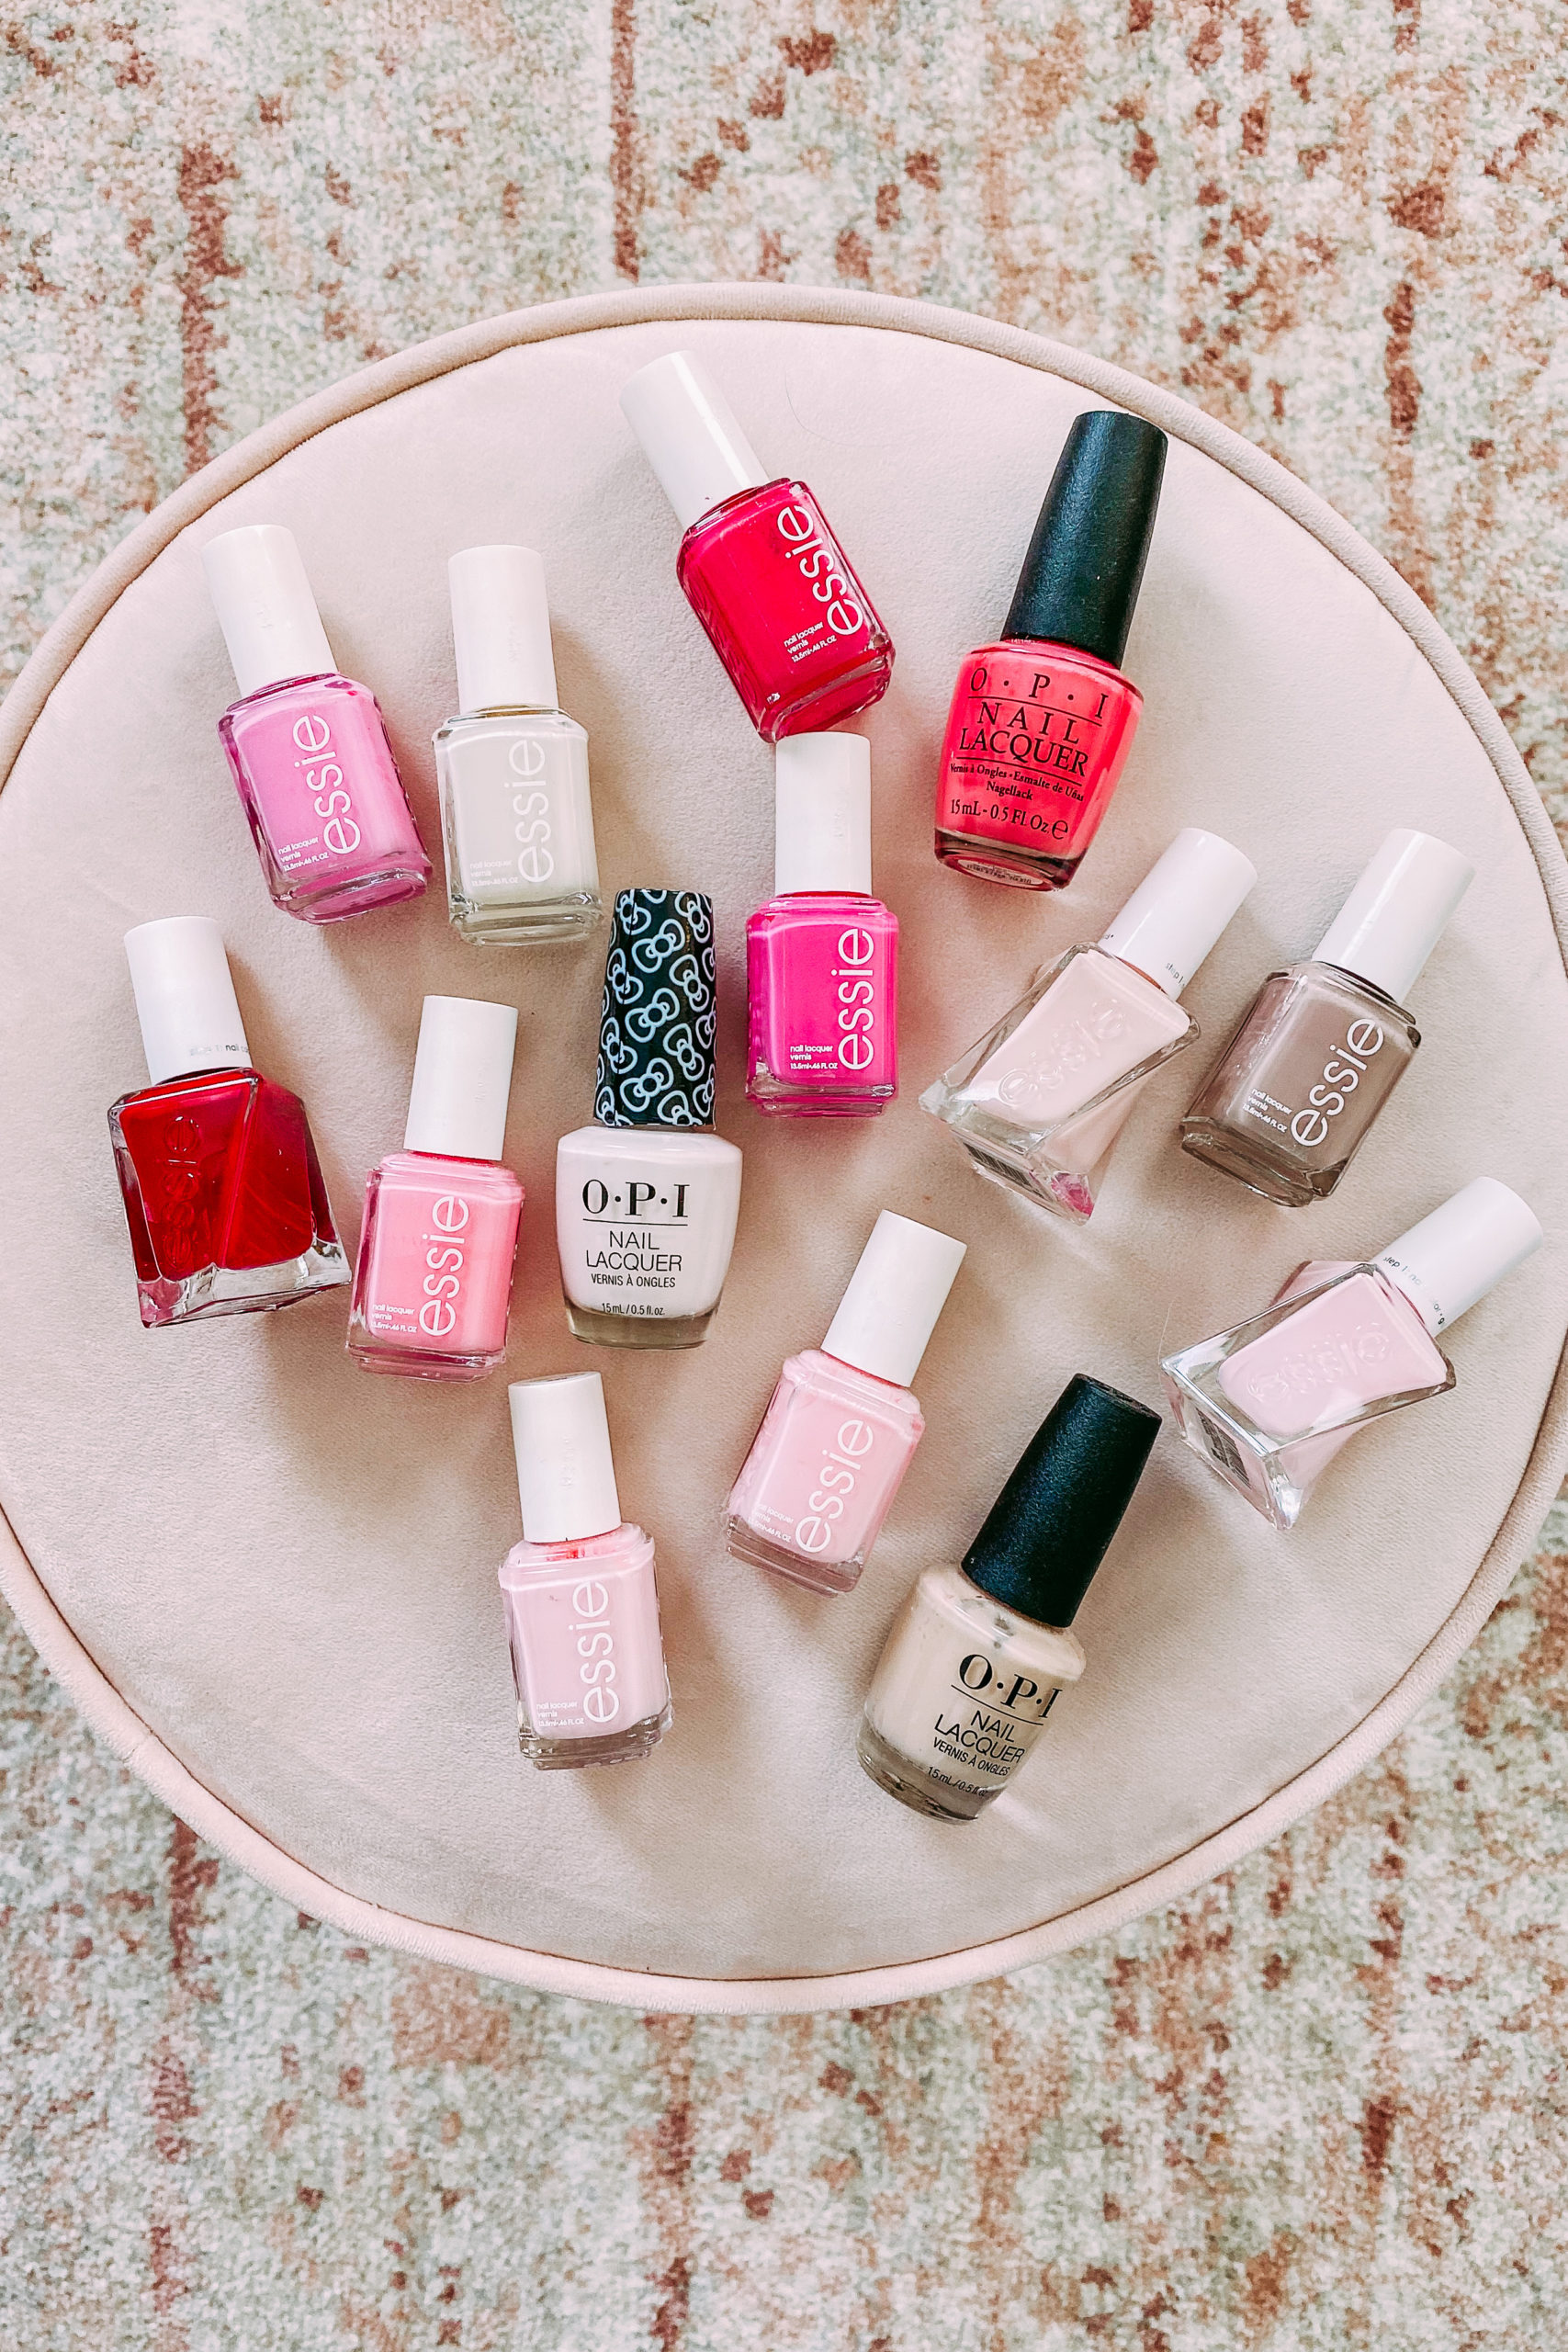 Products For The Best At-Home Manicure Favorite Thrifty Nail - My + Pineapple Polishes